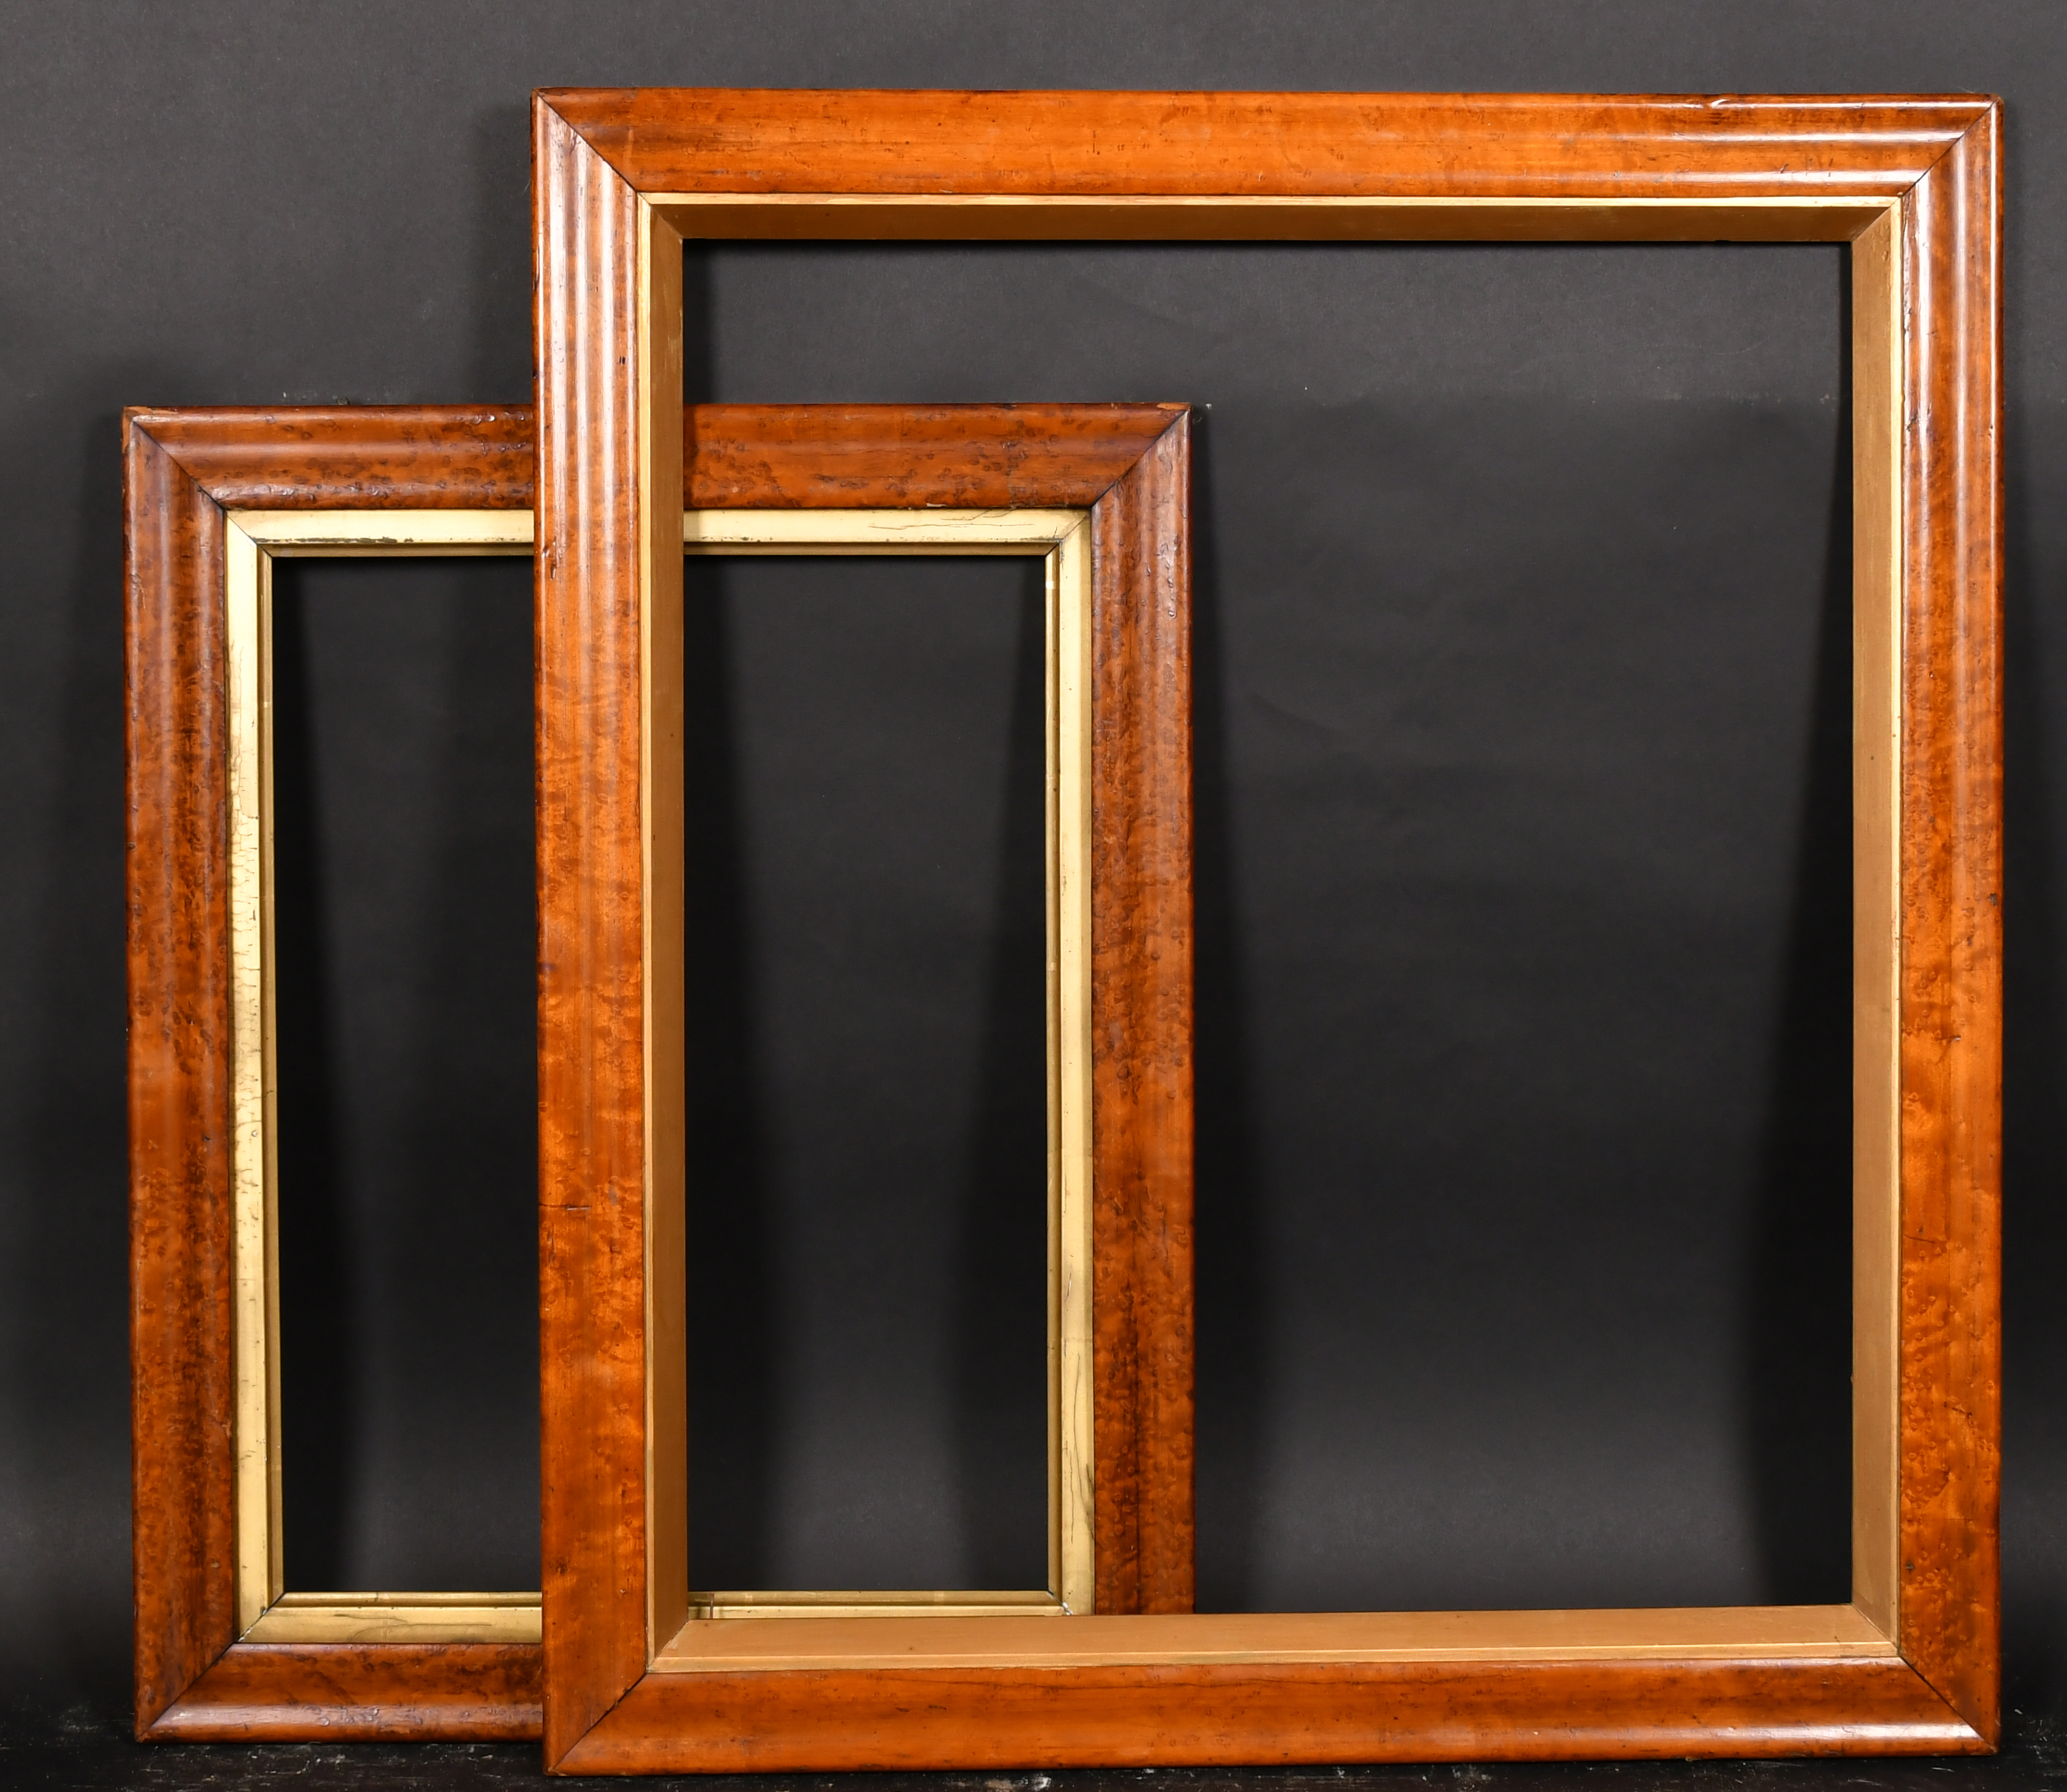 19th Century English School. A Maple Frame, with a gilt slip, rebate 19.75" x 15" (50.1 x 38.1cm) - Image 2 of 3